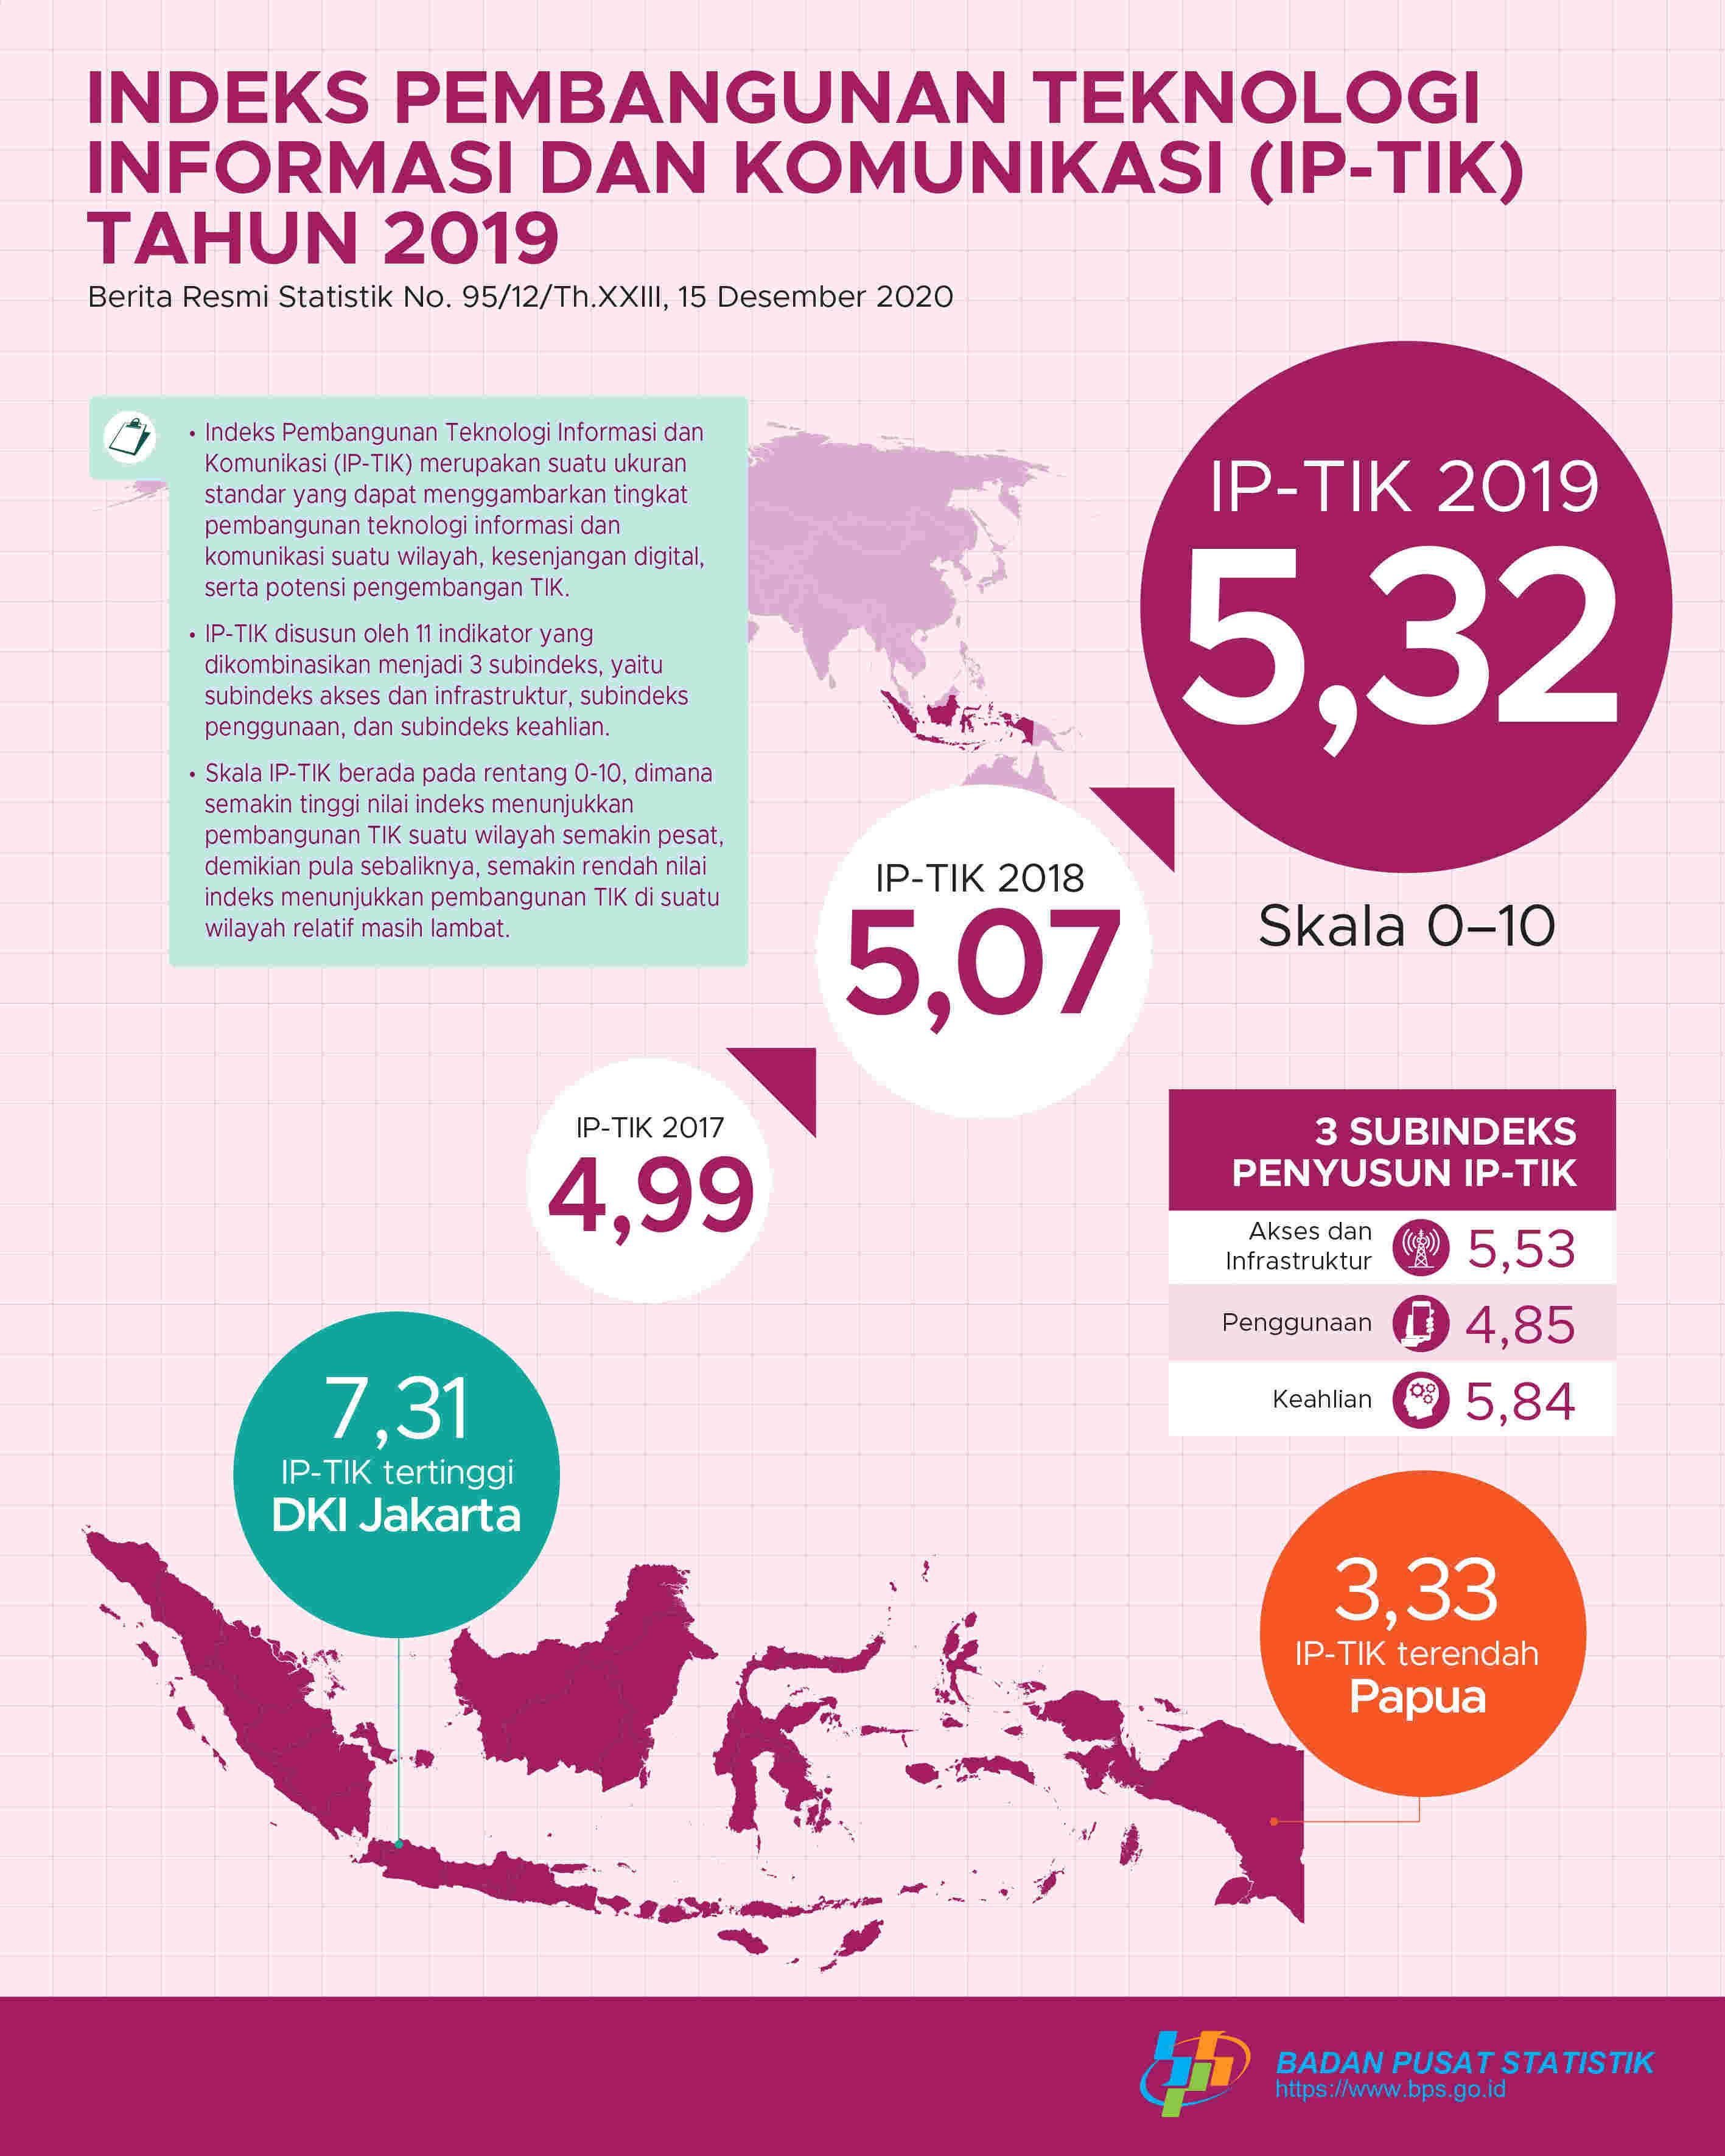 Indonesia's 2019 Information and Communication Technology Development Index (IP-ICT) of 5.32 On Scale 0-10